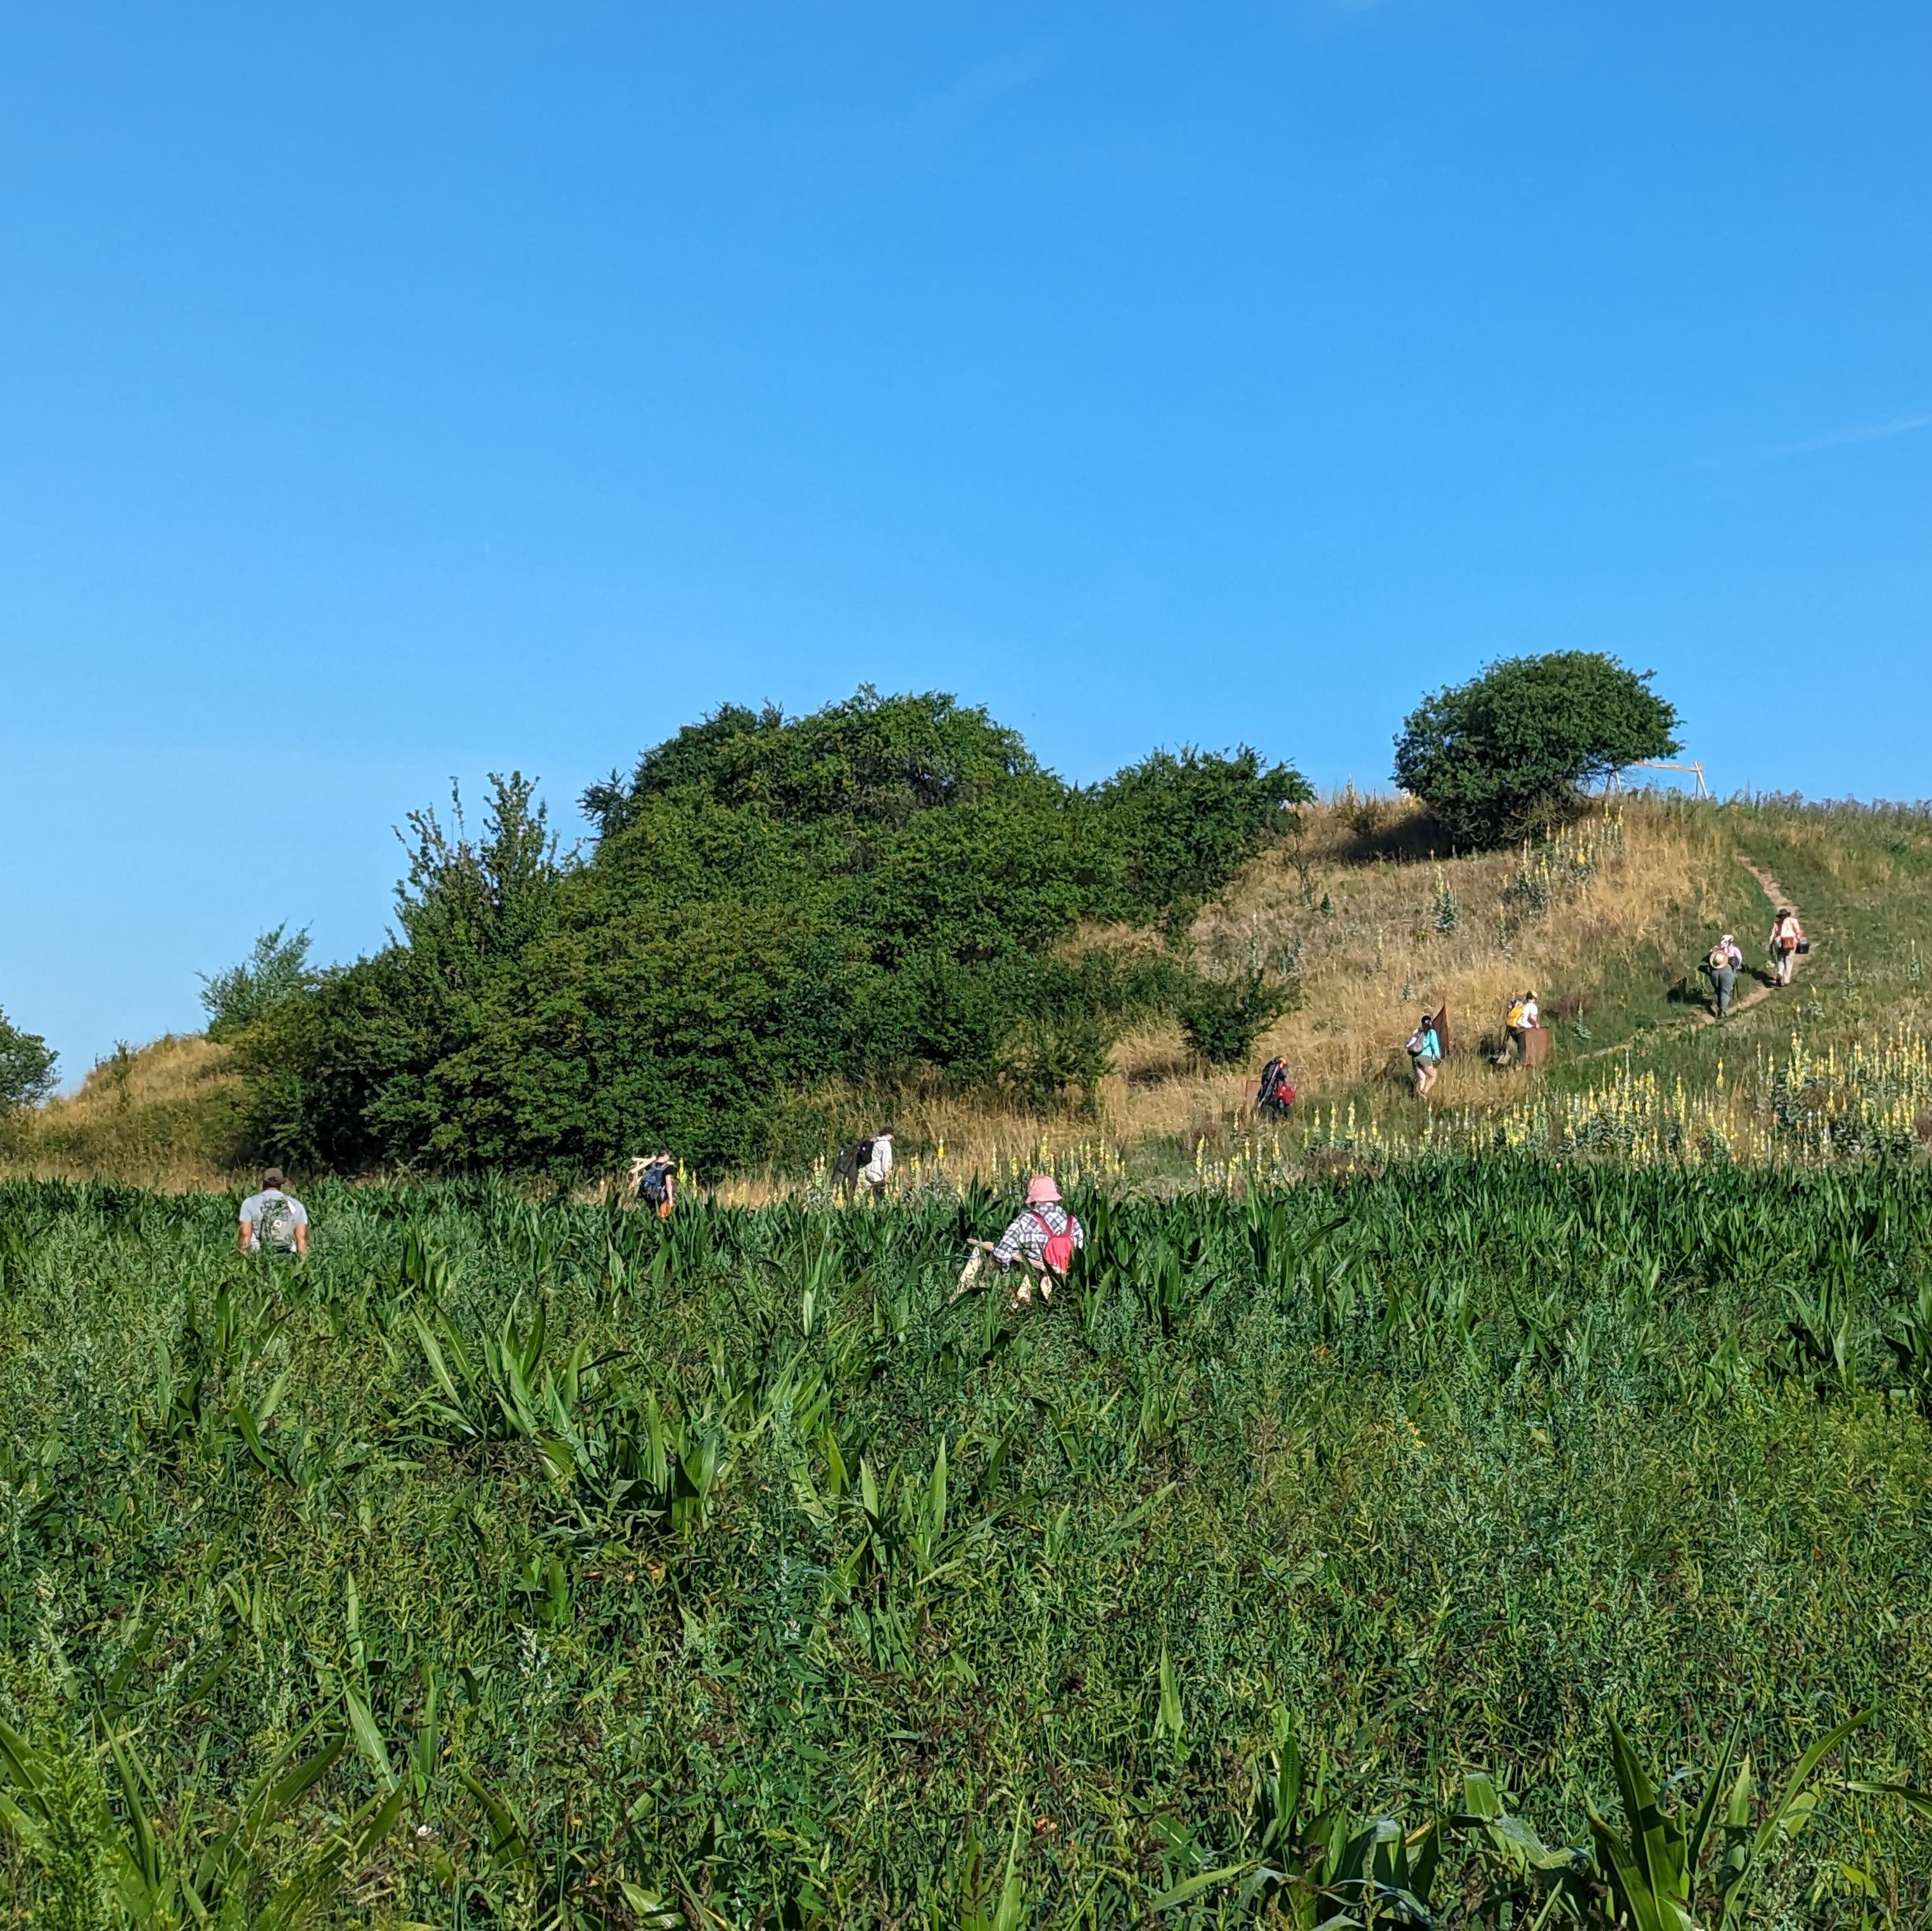 People walking up a hill surrounded by cornfields